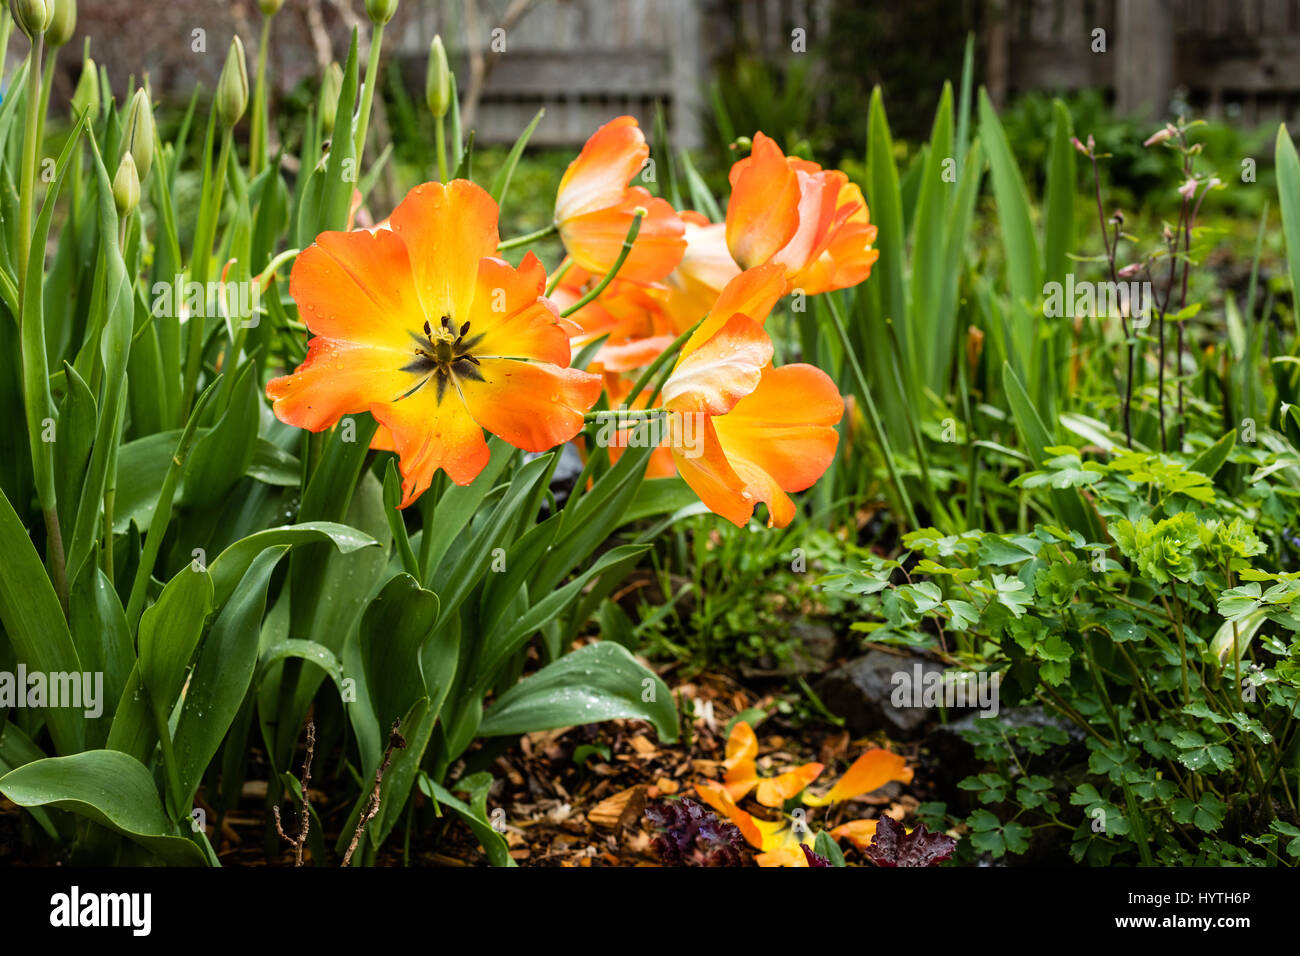 Shades of orange on opened tulips surrounded by green contrasting plants. Stock Photo